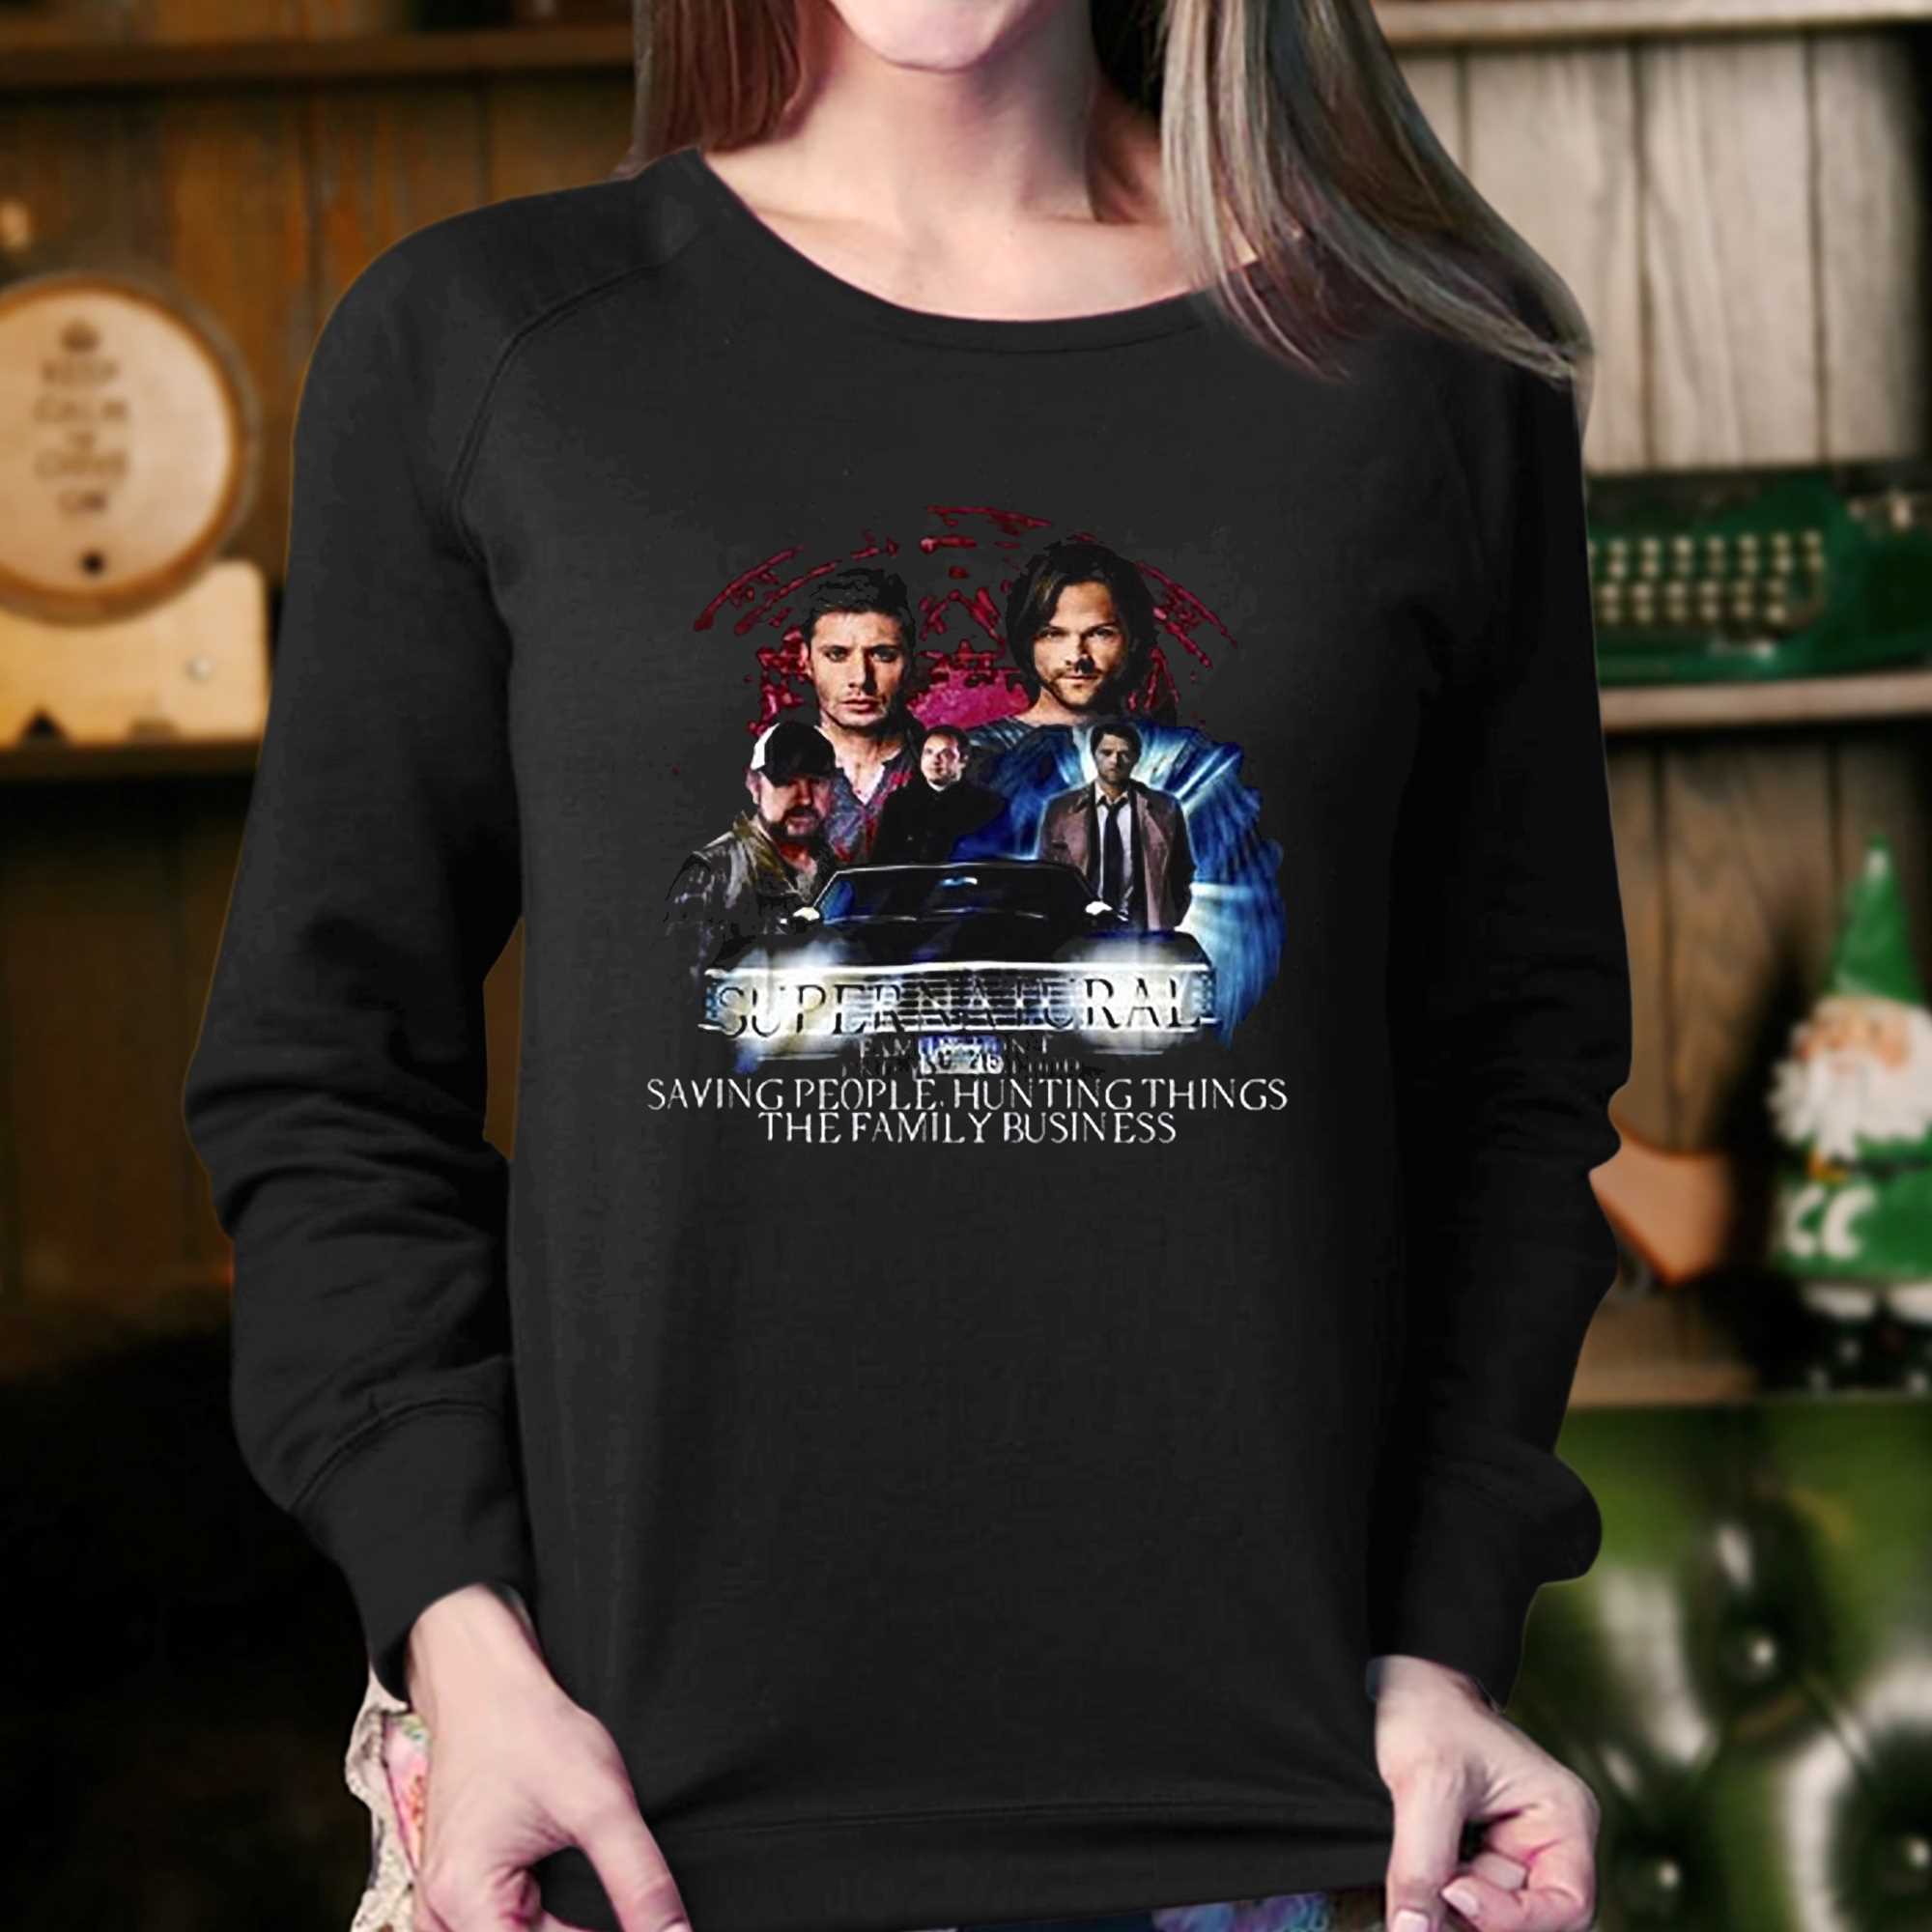 Supernatural Saying People Hunting Things The Family Business T-shirt 